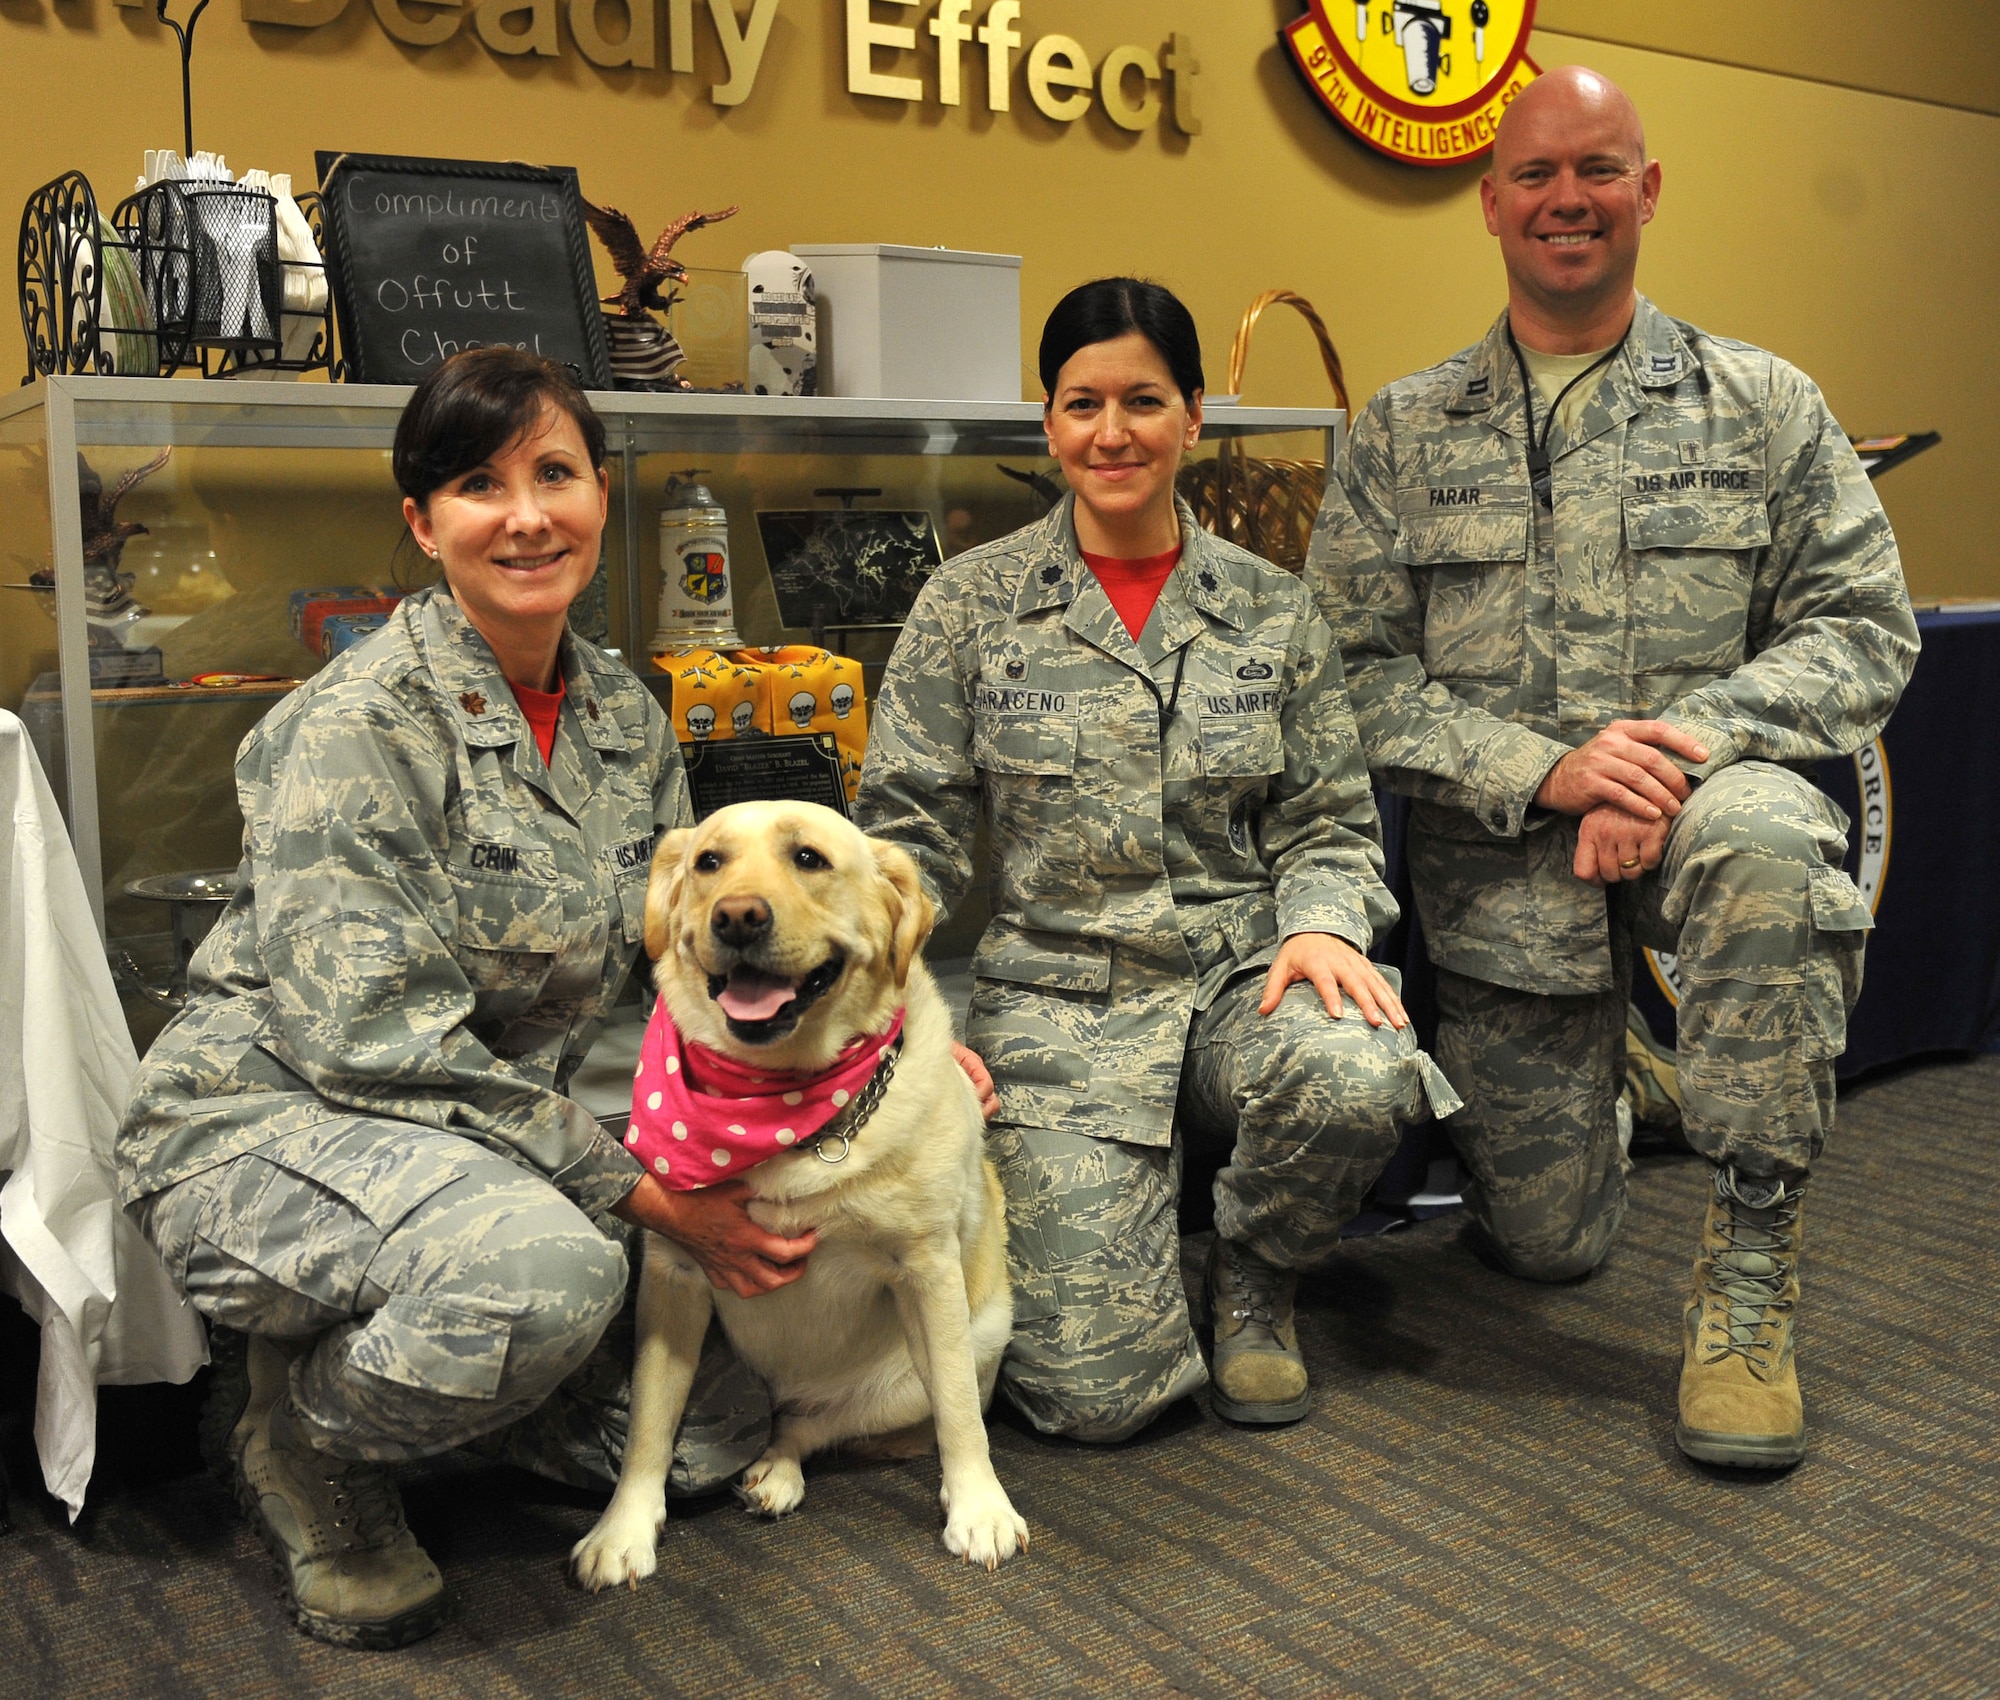 Maj. Shauna Crim, the mental health flight commander with the 55th Medical Operations Group, left, and her therapy dog, Lily, Lt. Col. Jennifer Saraceno, commander of the 97th Intelligence Squadron and Capt. Michael Farar, a chaplain with the 55th Wing Chaplain Corps attend the open house for the new mental health and chaplains' office within the secure area of the 97th IS at Offutt Air Force Base, Neb., Jan. 8, 2016. Crim and Farar will be manning the office, which was created to give Airmen a secure location in which to share potentially classified concerns with chaplains and mental health services. (U.S. Air Force photo/Senior Airman Rachel Hammes)